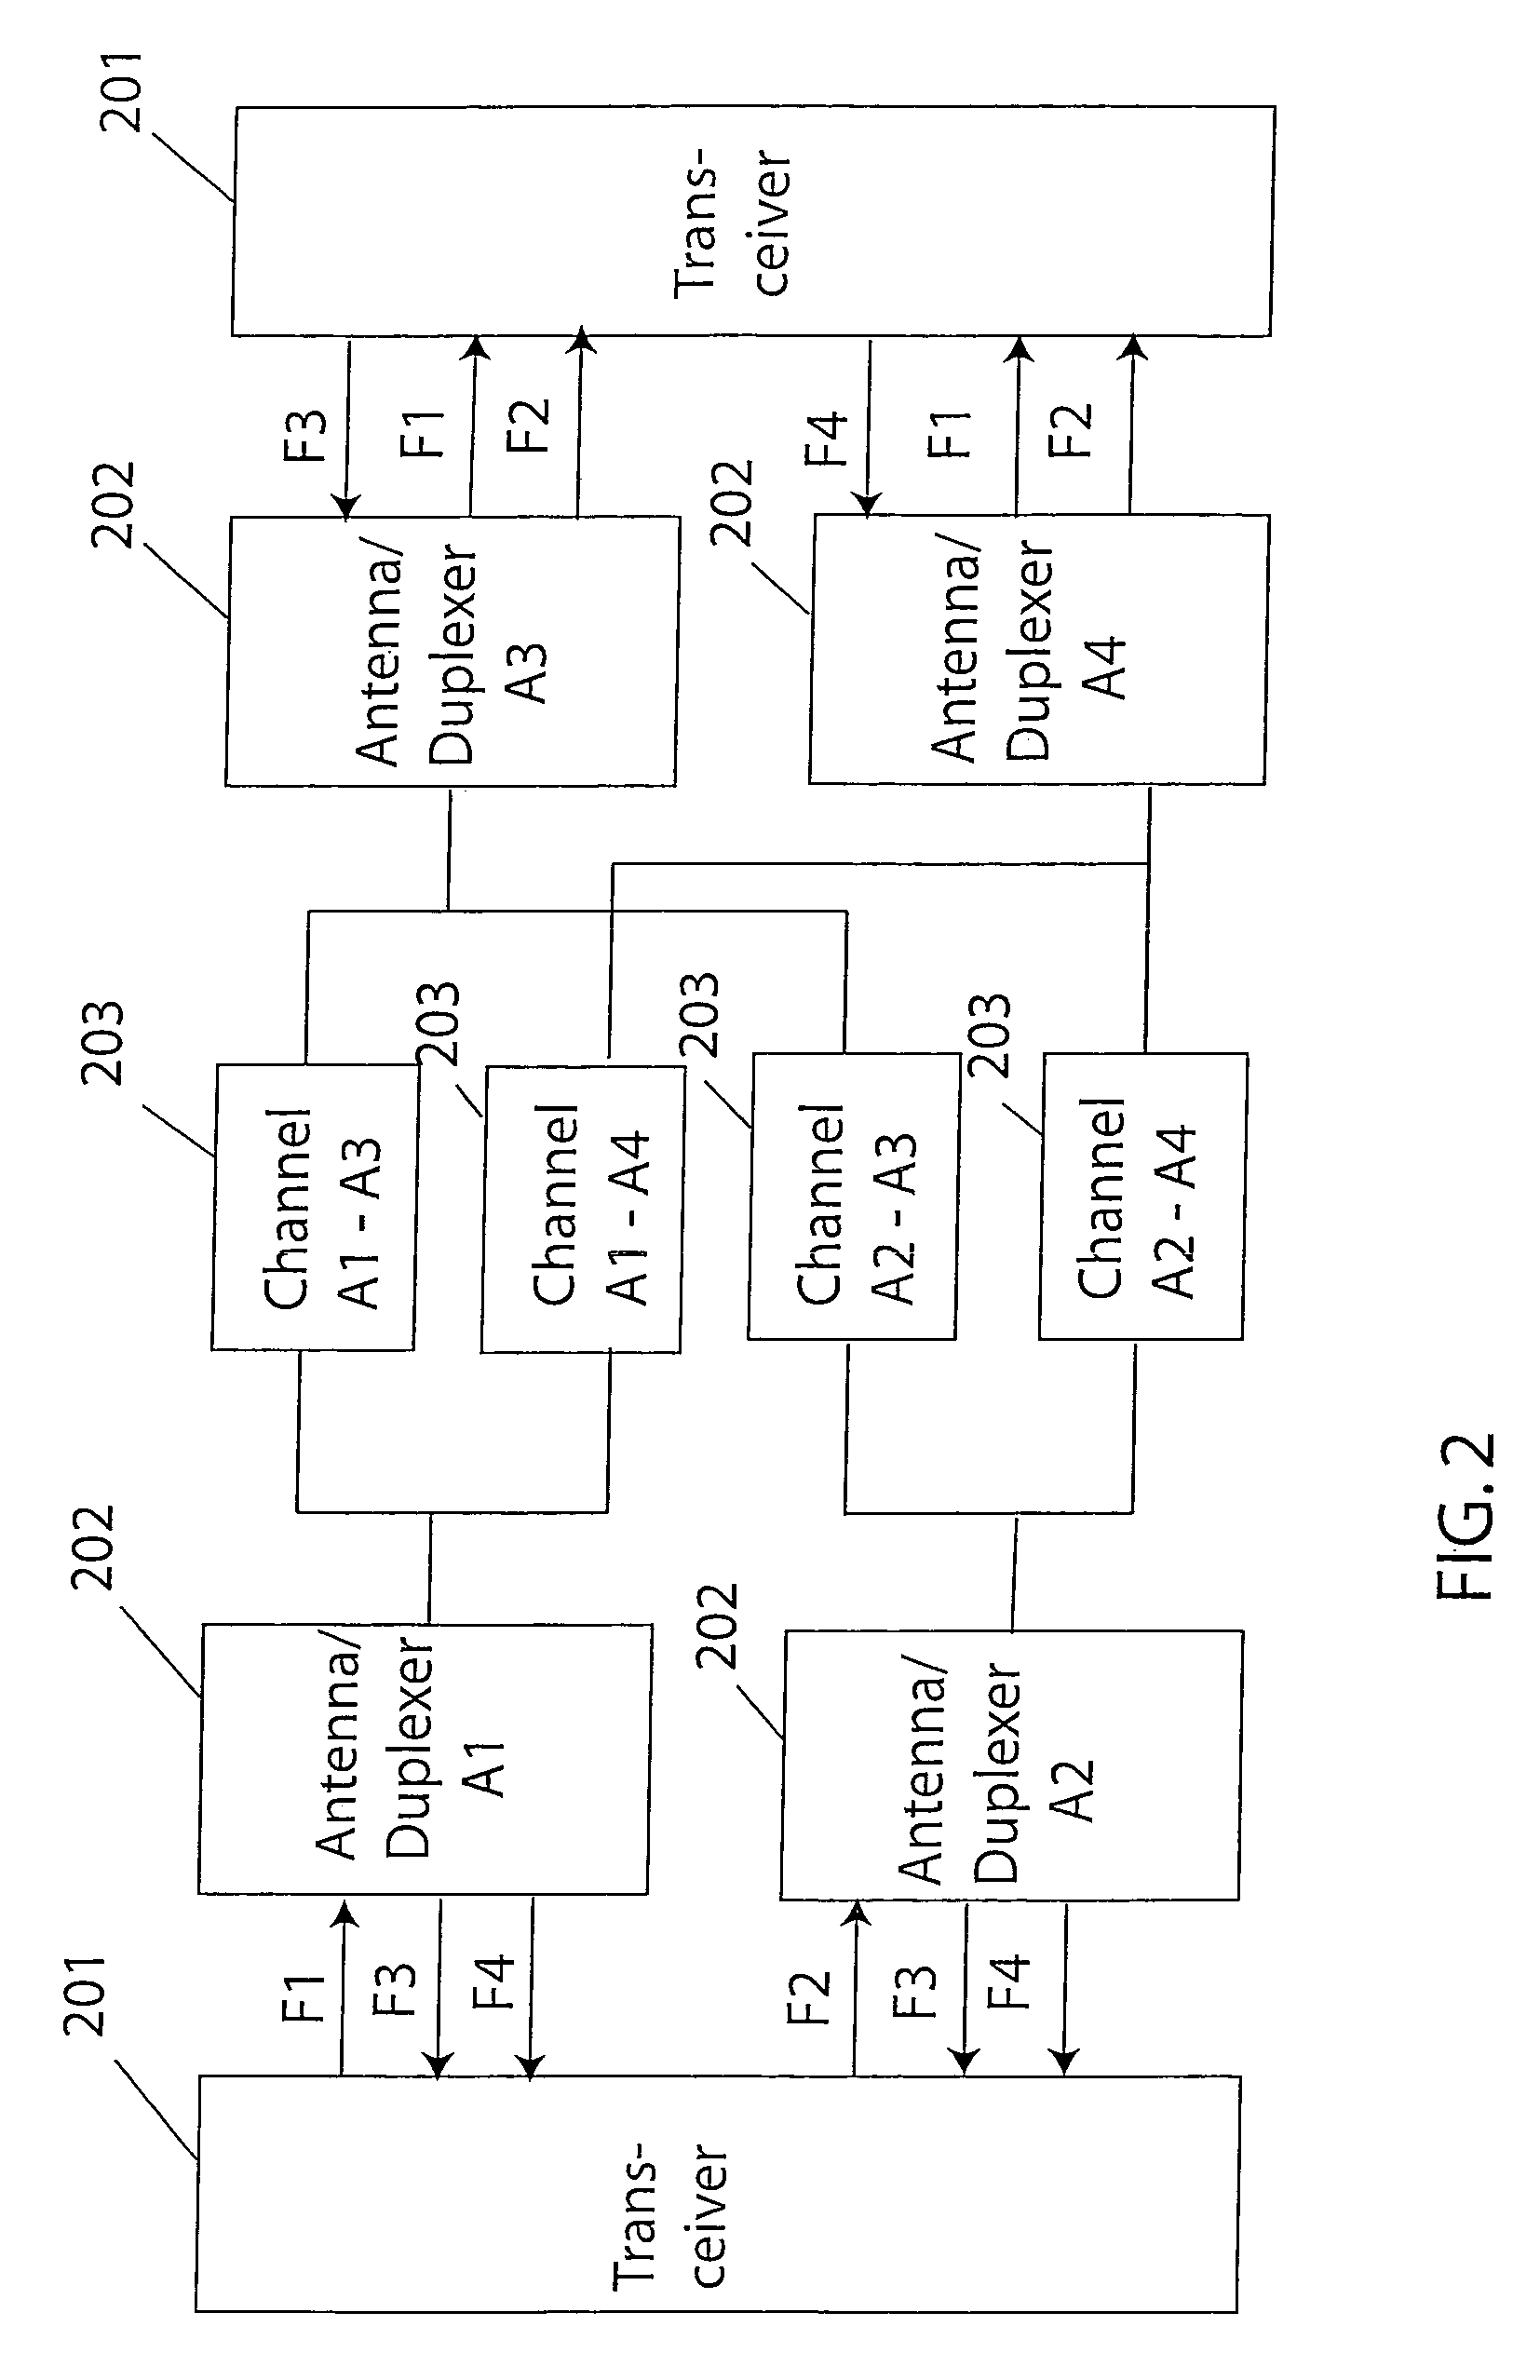 Technique for adaptive data rate communication over fading dispersive channels